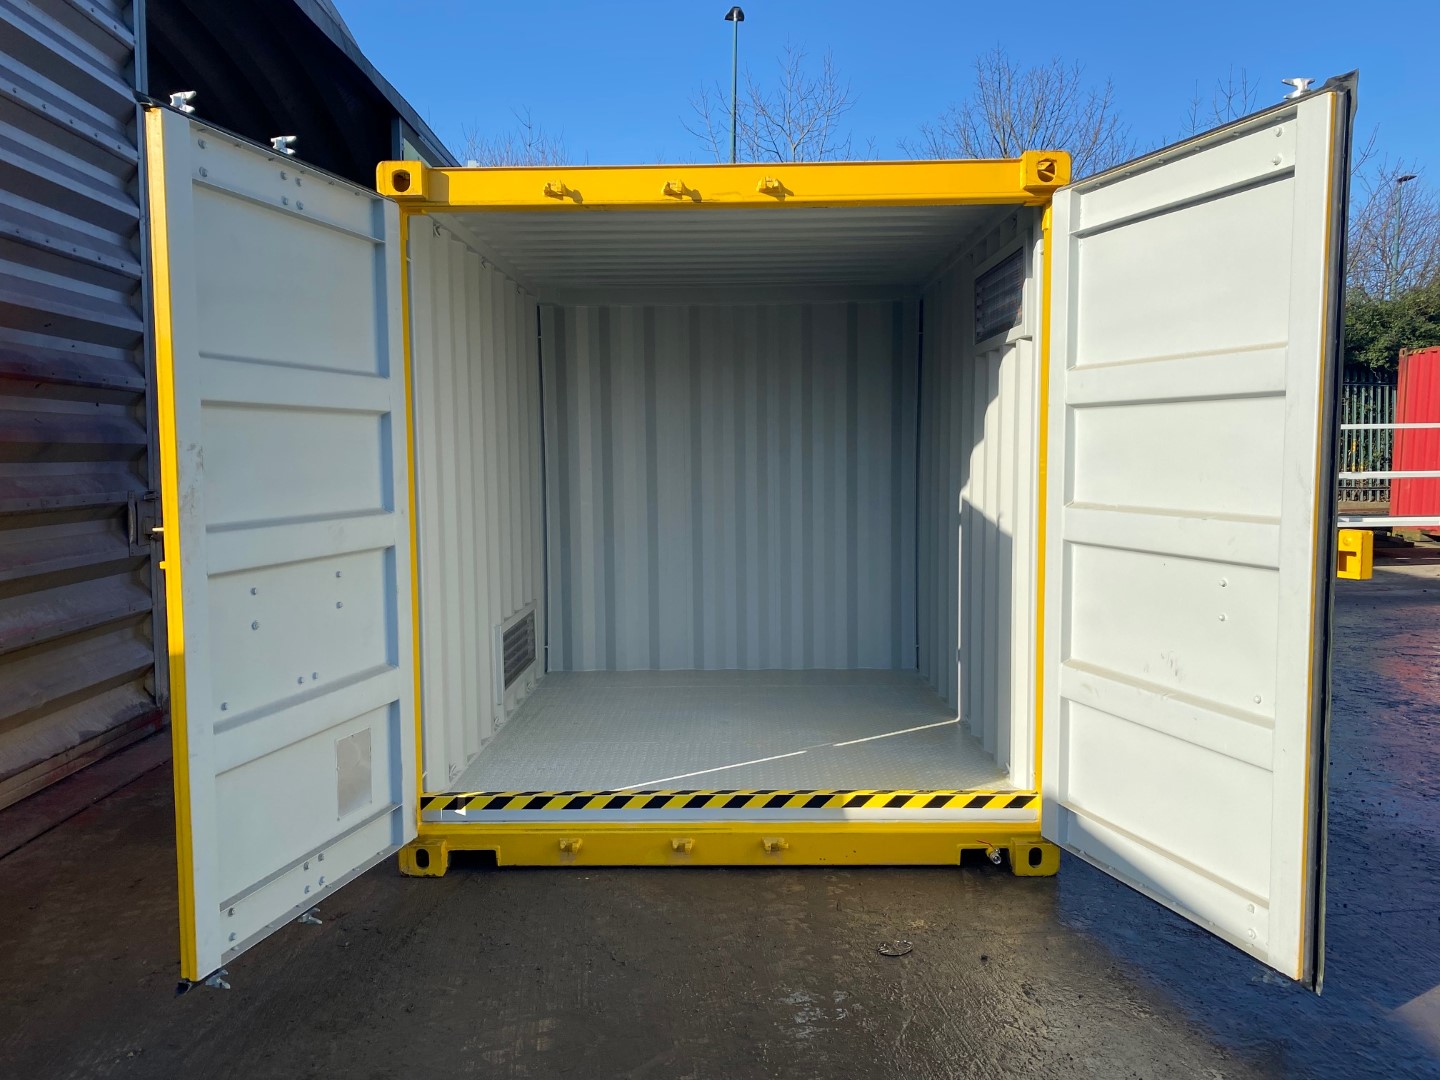 UK Providers of Bunded Chemical Storage Containers